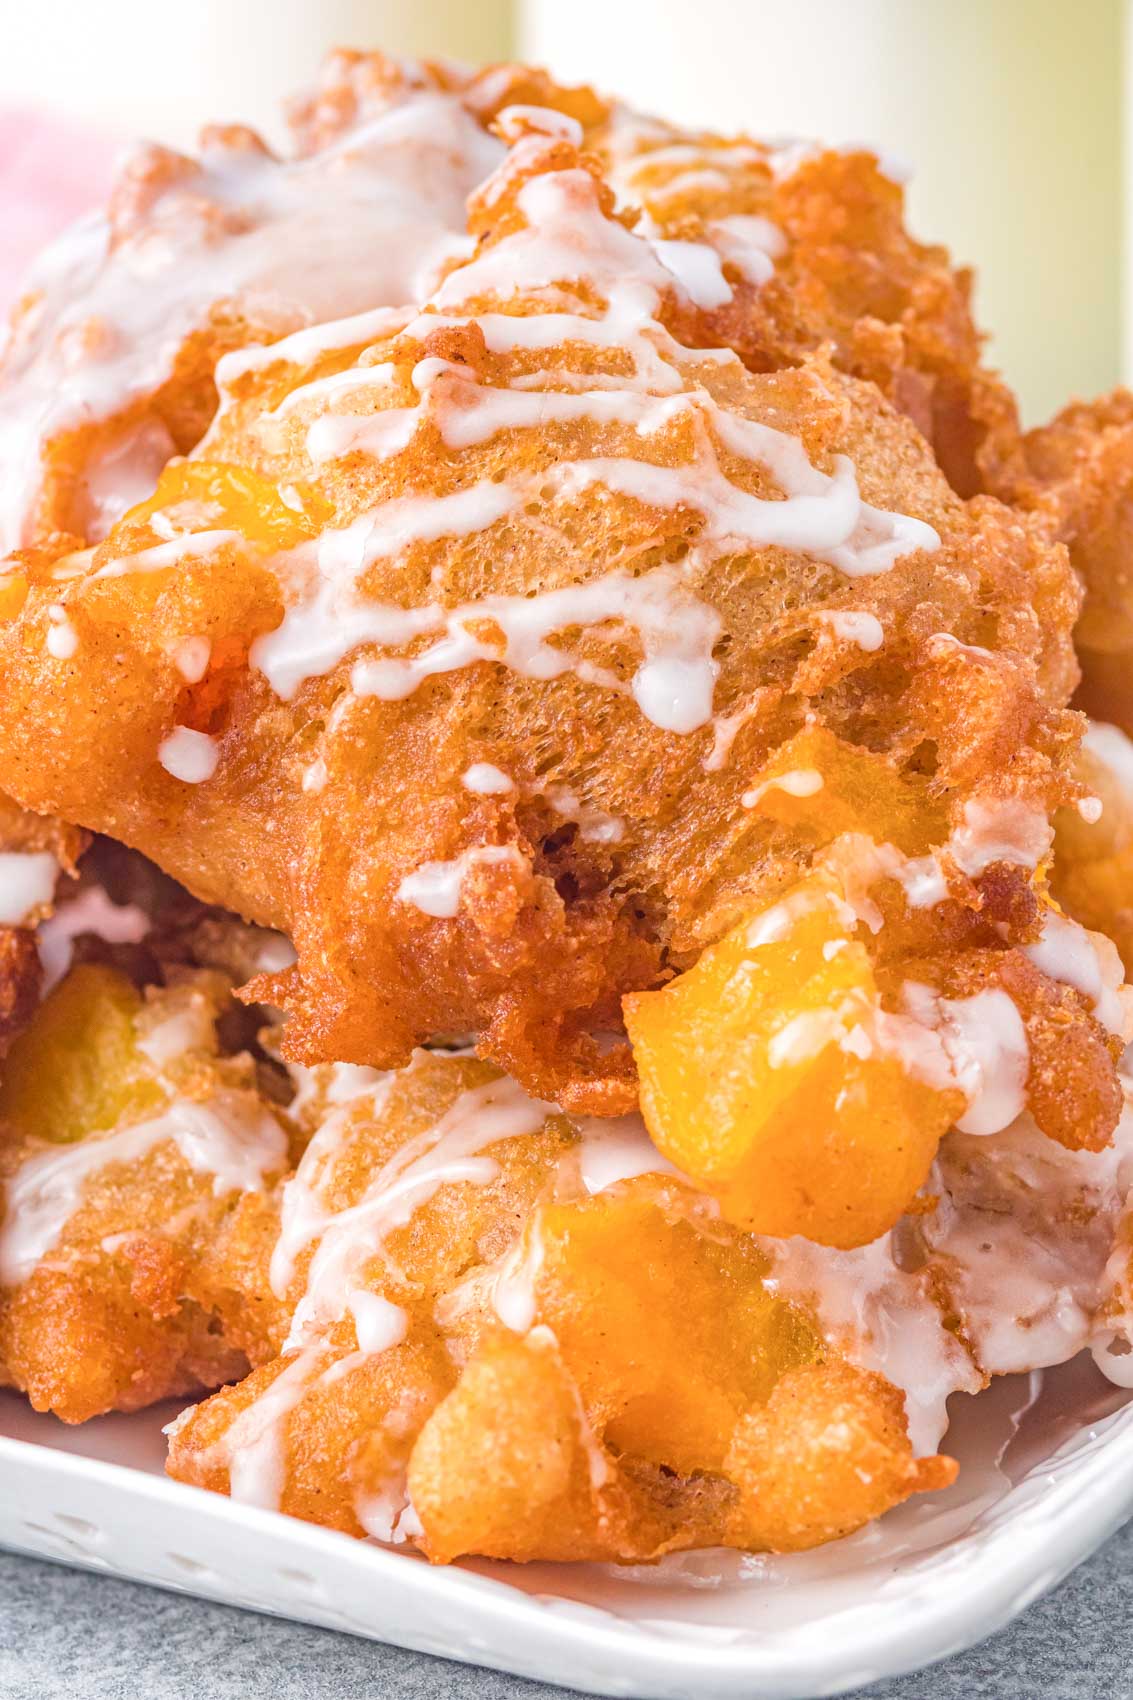 close up image of a peach fritter with sweet glaze